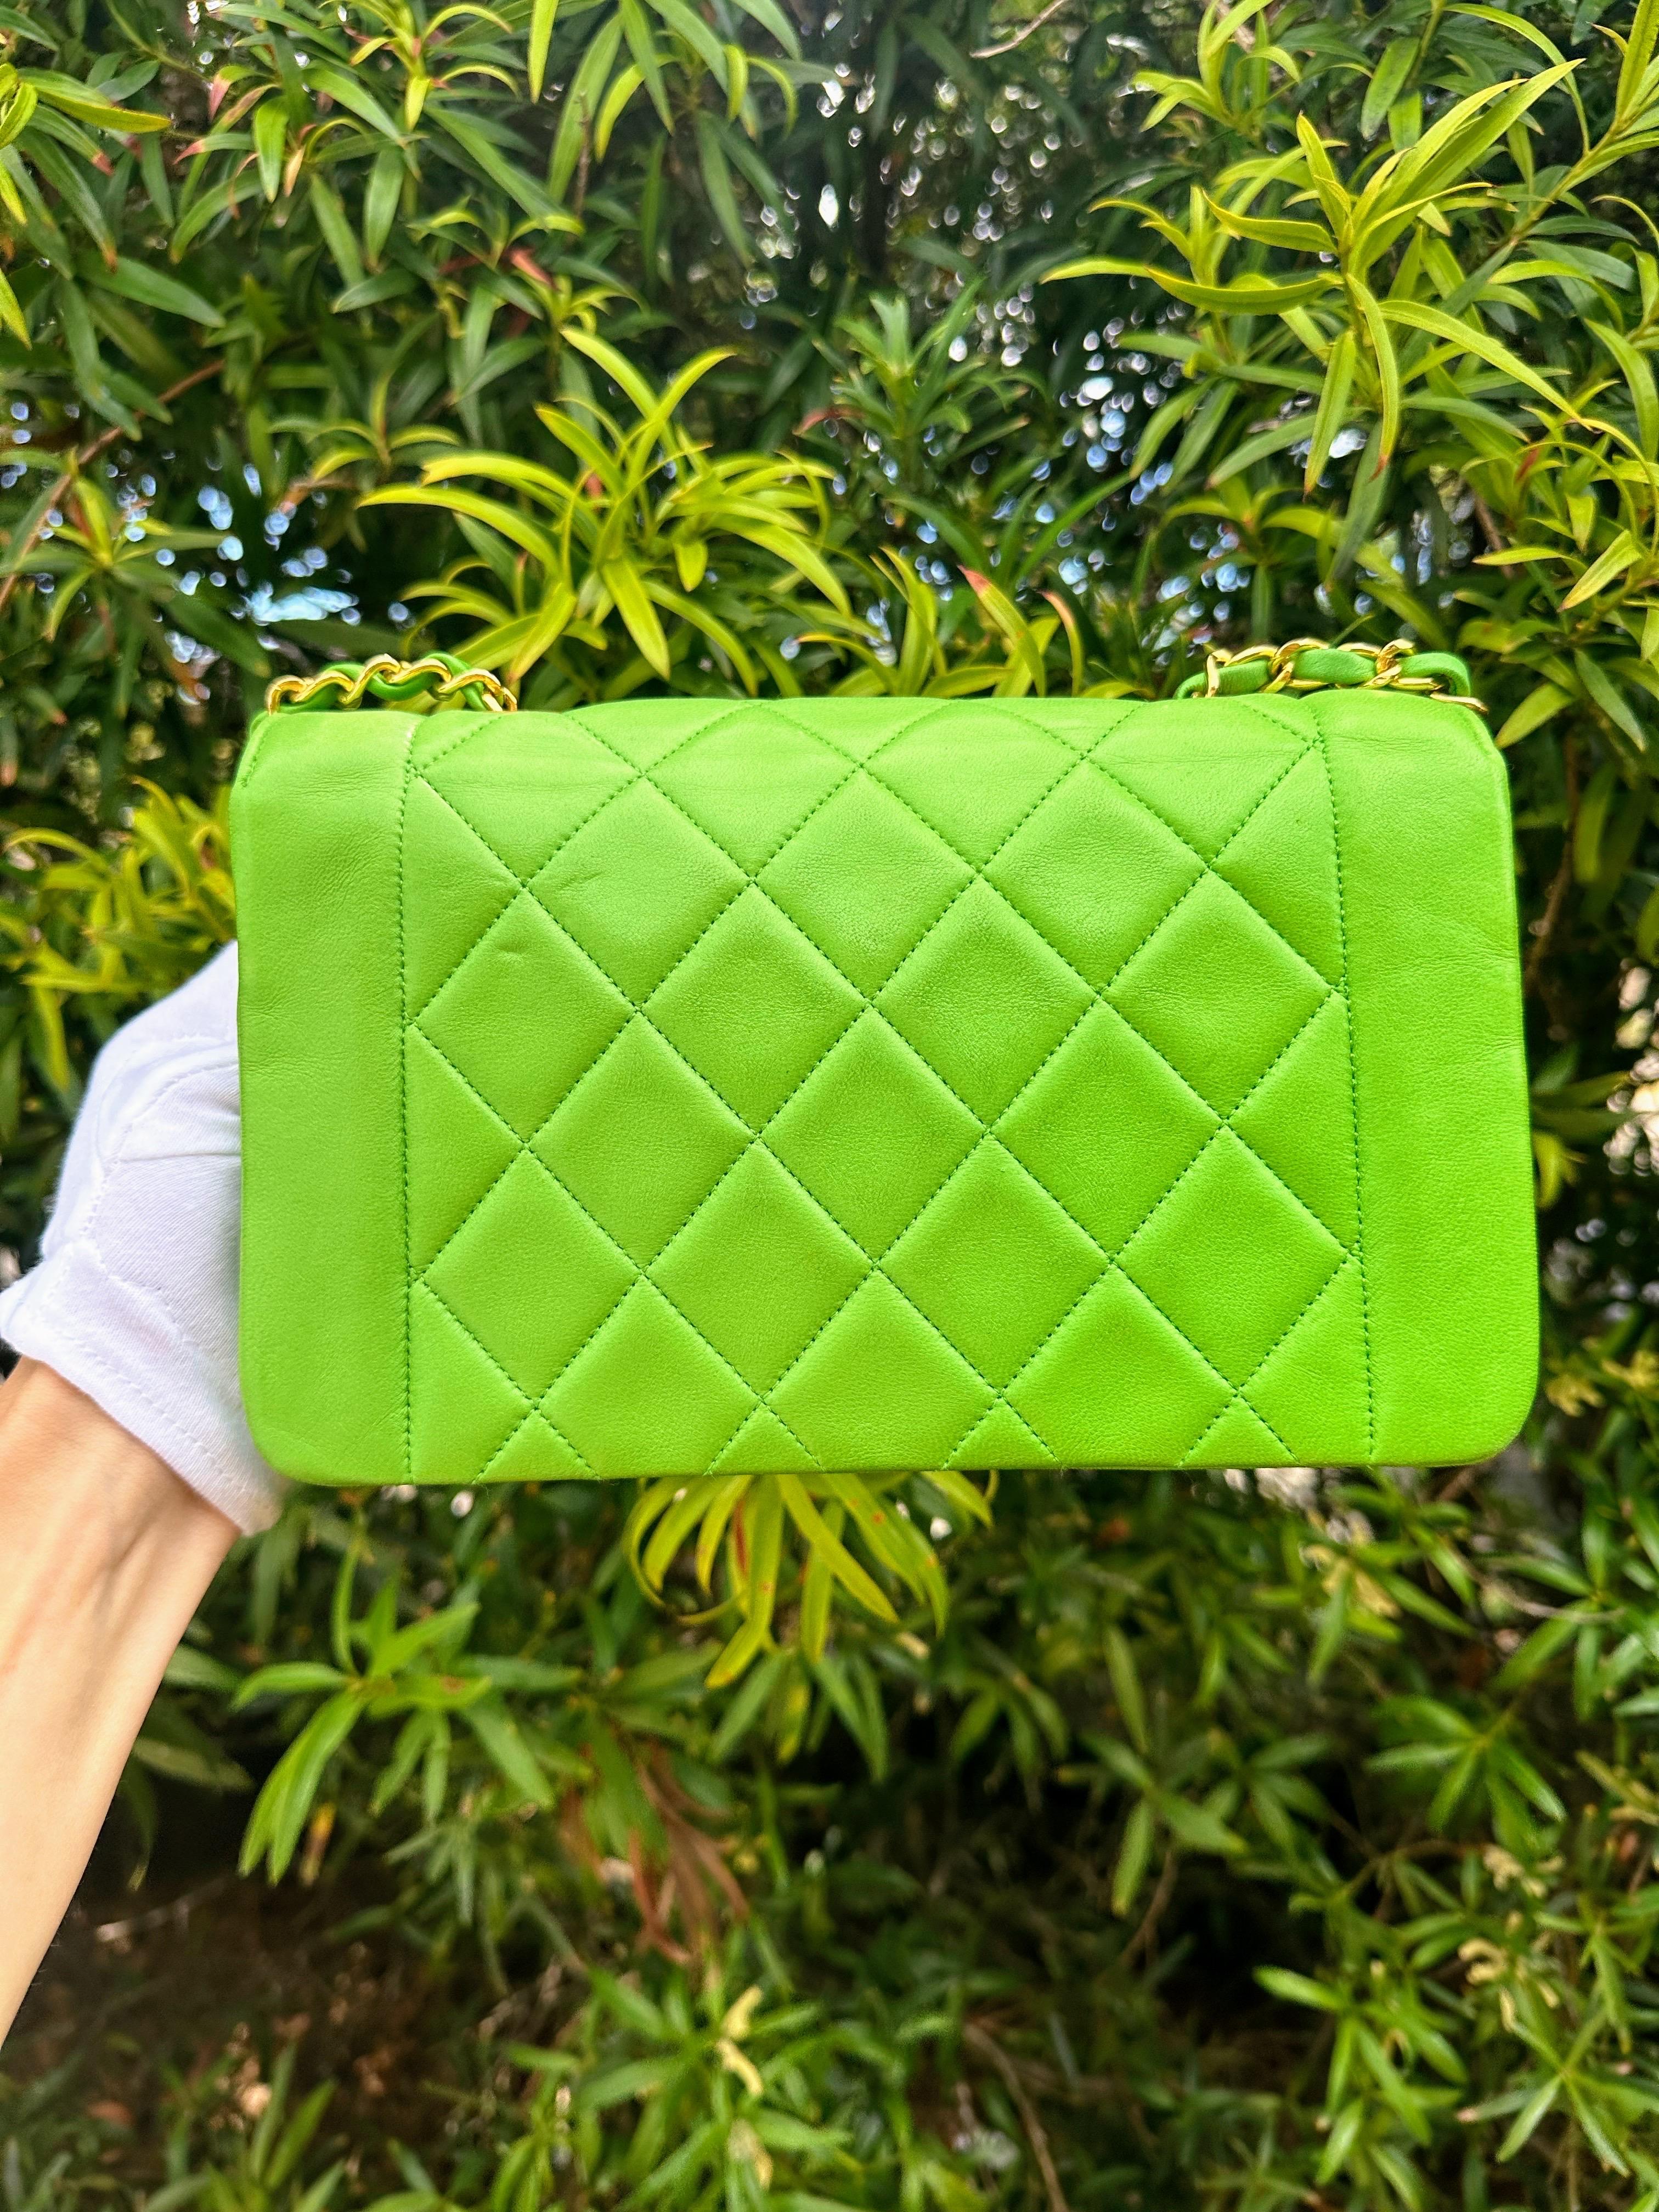 Chanel Vintage Green Small Diana Flap Bag 11